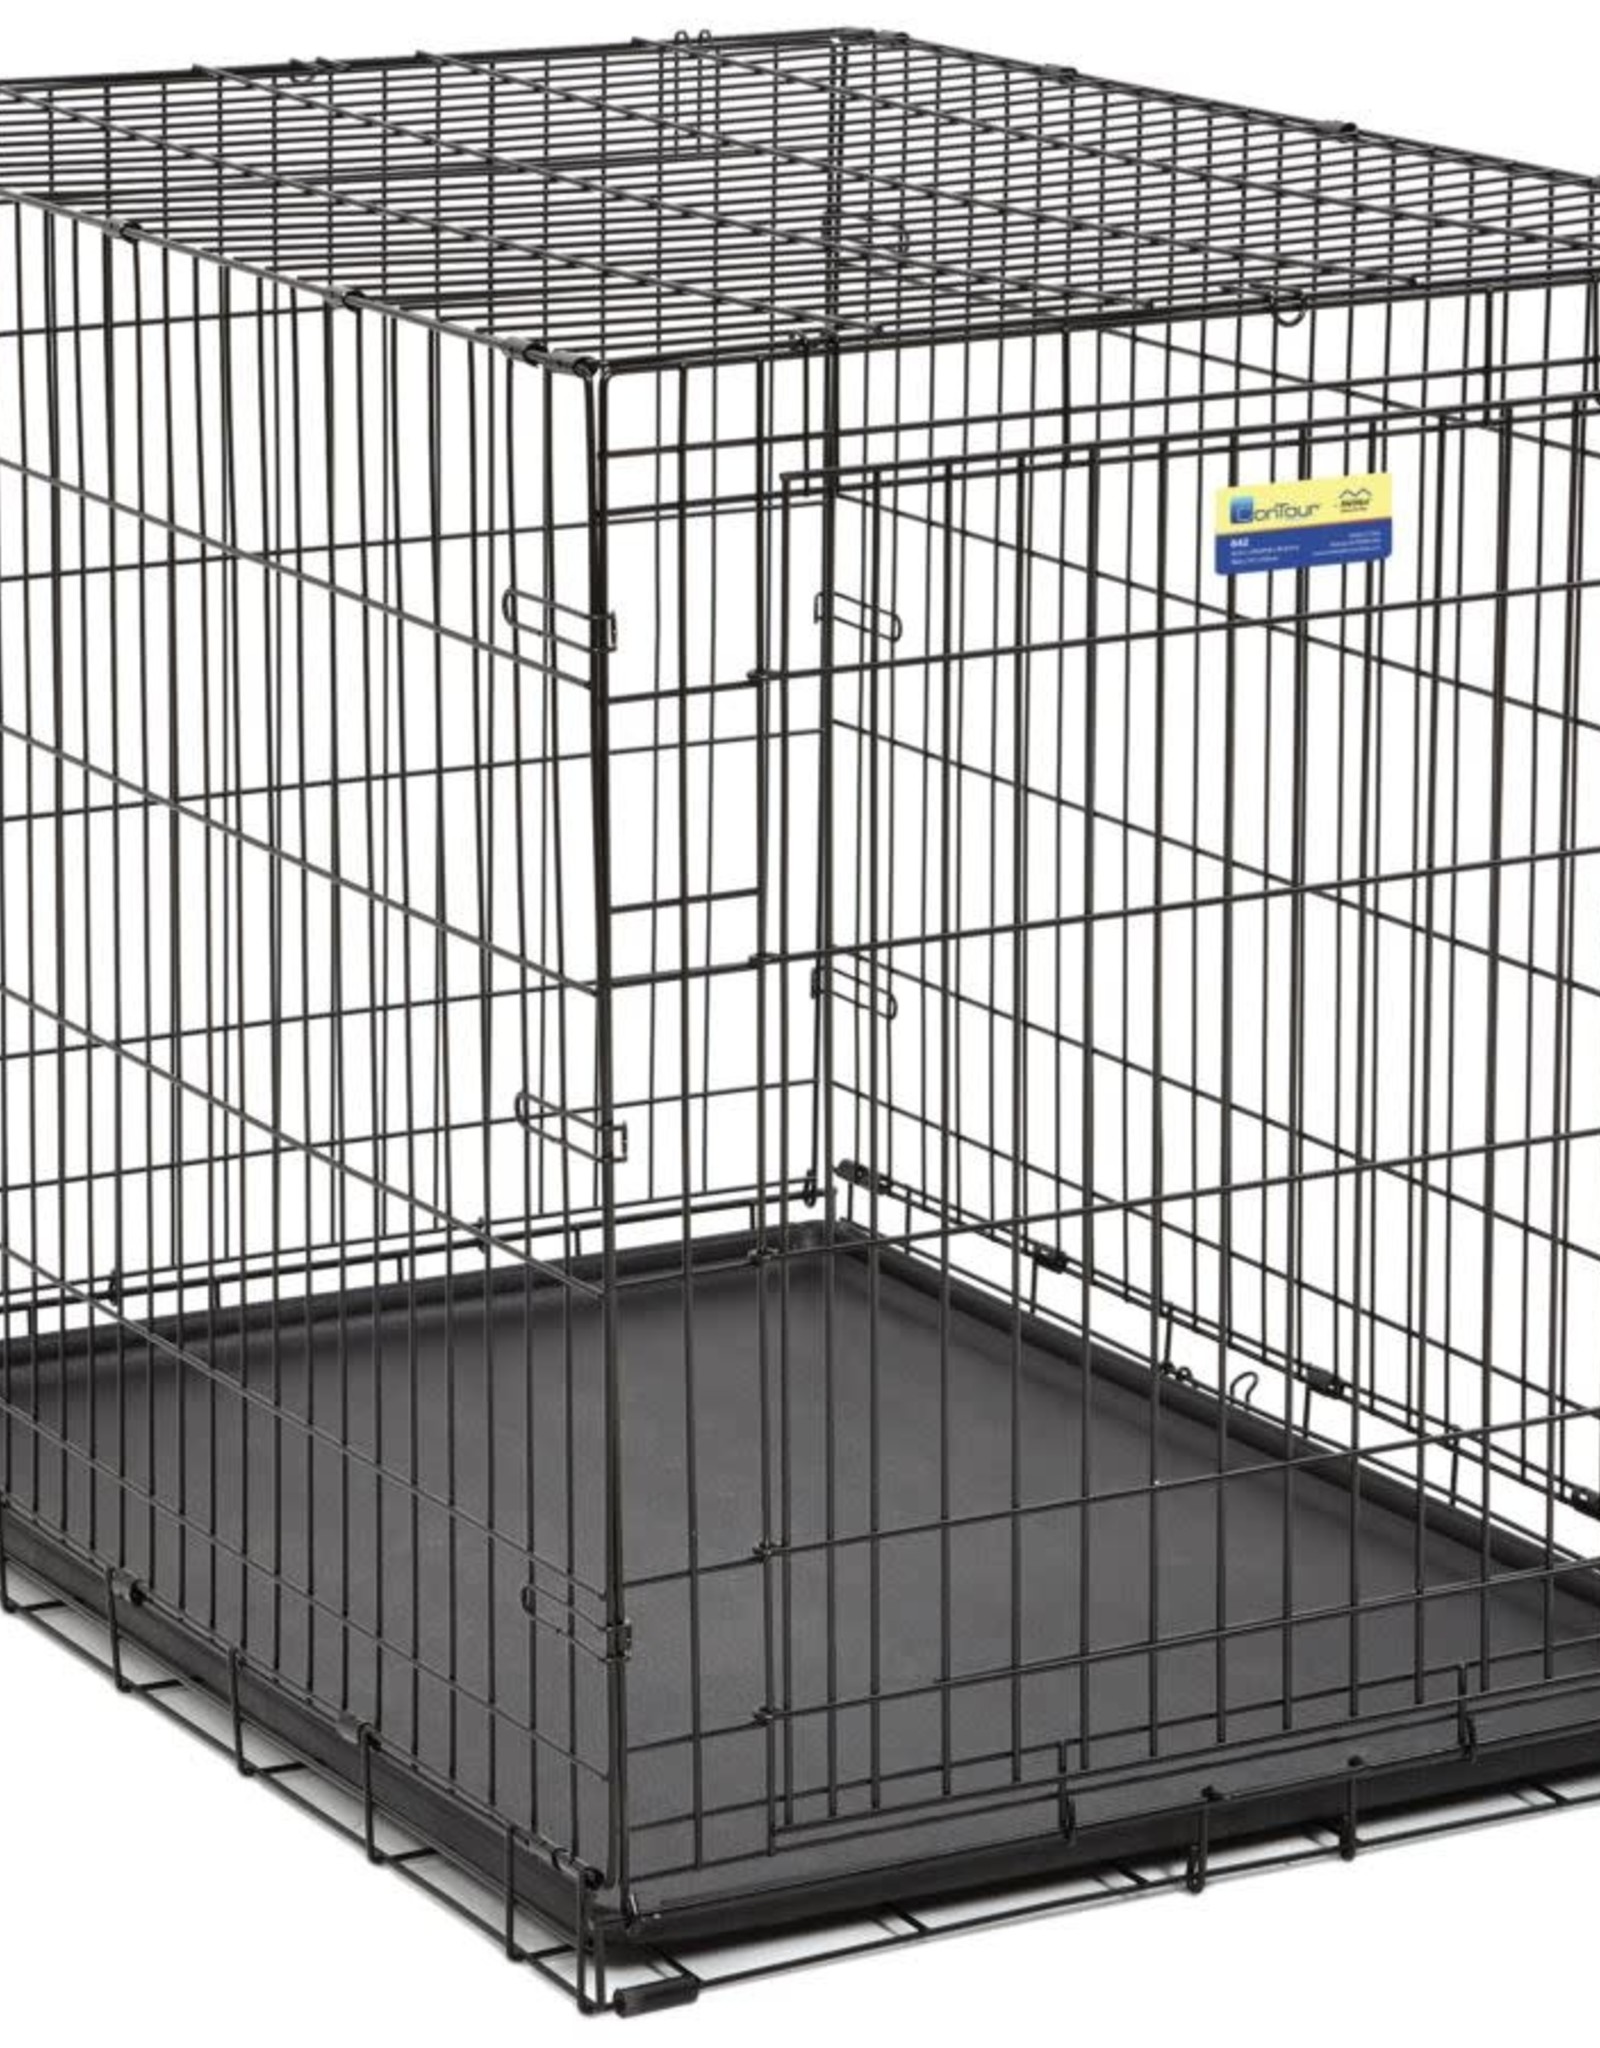 MIDWEST HOMES Midwest 42" Contour Dog Crate Single Door